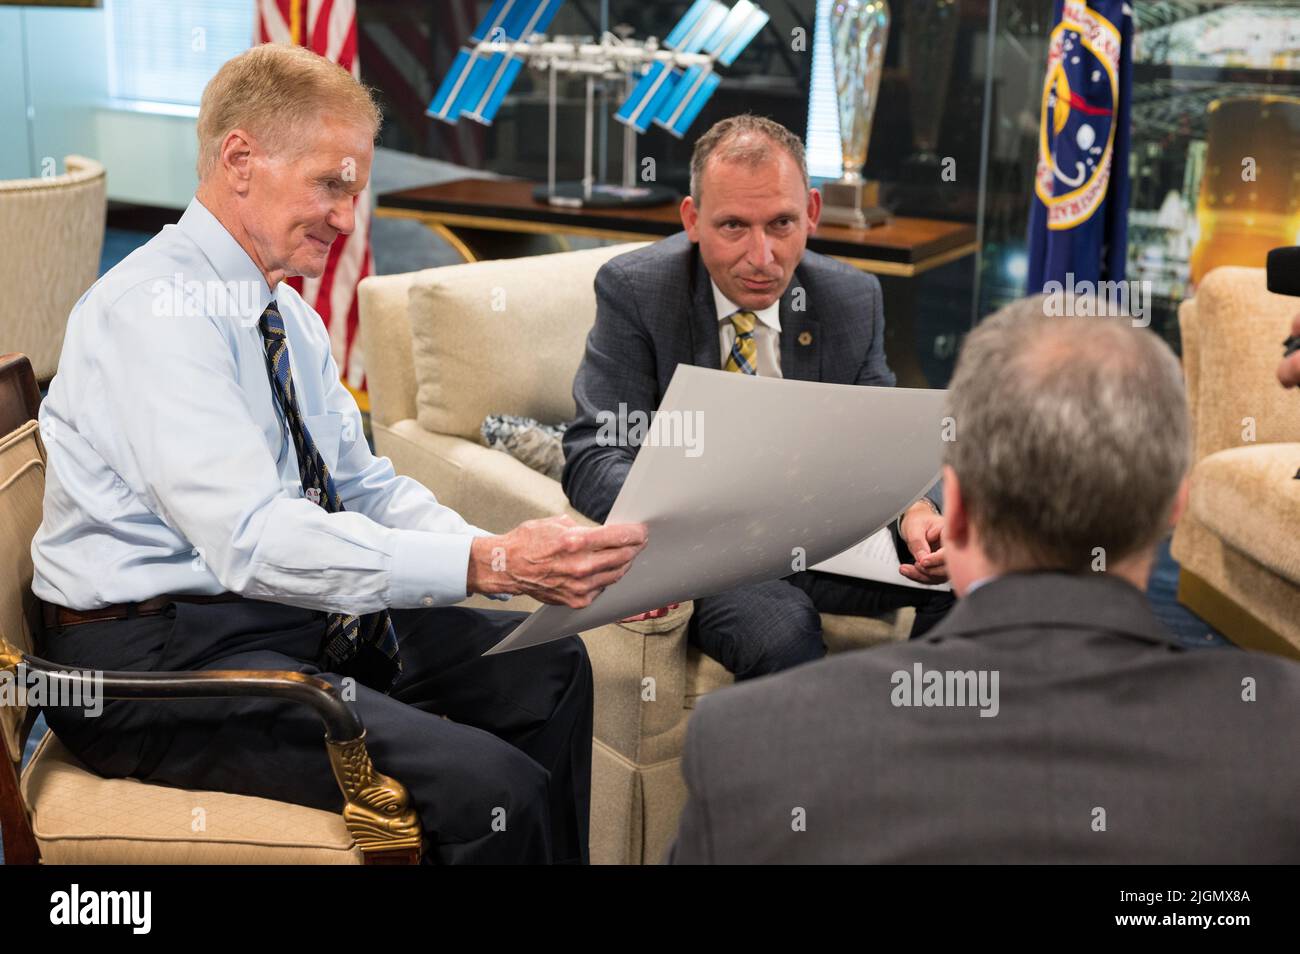 NASA Administrator Bill Nelson, left, and Associate Administrator for NASA's Science Mission Directorate, Thomas Zurbuchen, center, react to the first full-color images from NASA's James Webb Space Telescope in a preview meeting with Webb project scientist at the Space Telescope Science Institute, Klaus Pontoppidan, right, Monday, July 11, 2022 at the Mary W. Jackson NASA Headquarters building in Washington. The first images and spectroscopic data from the world's largest and most powerful space telescope, set to be released July 11 and 12, will demonstrate Webb at its full power, as it begins Stock Photo